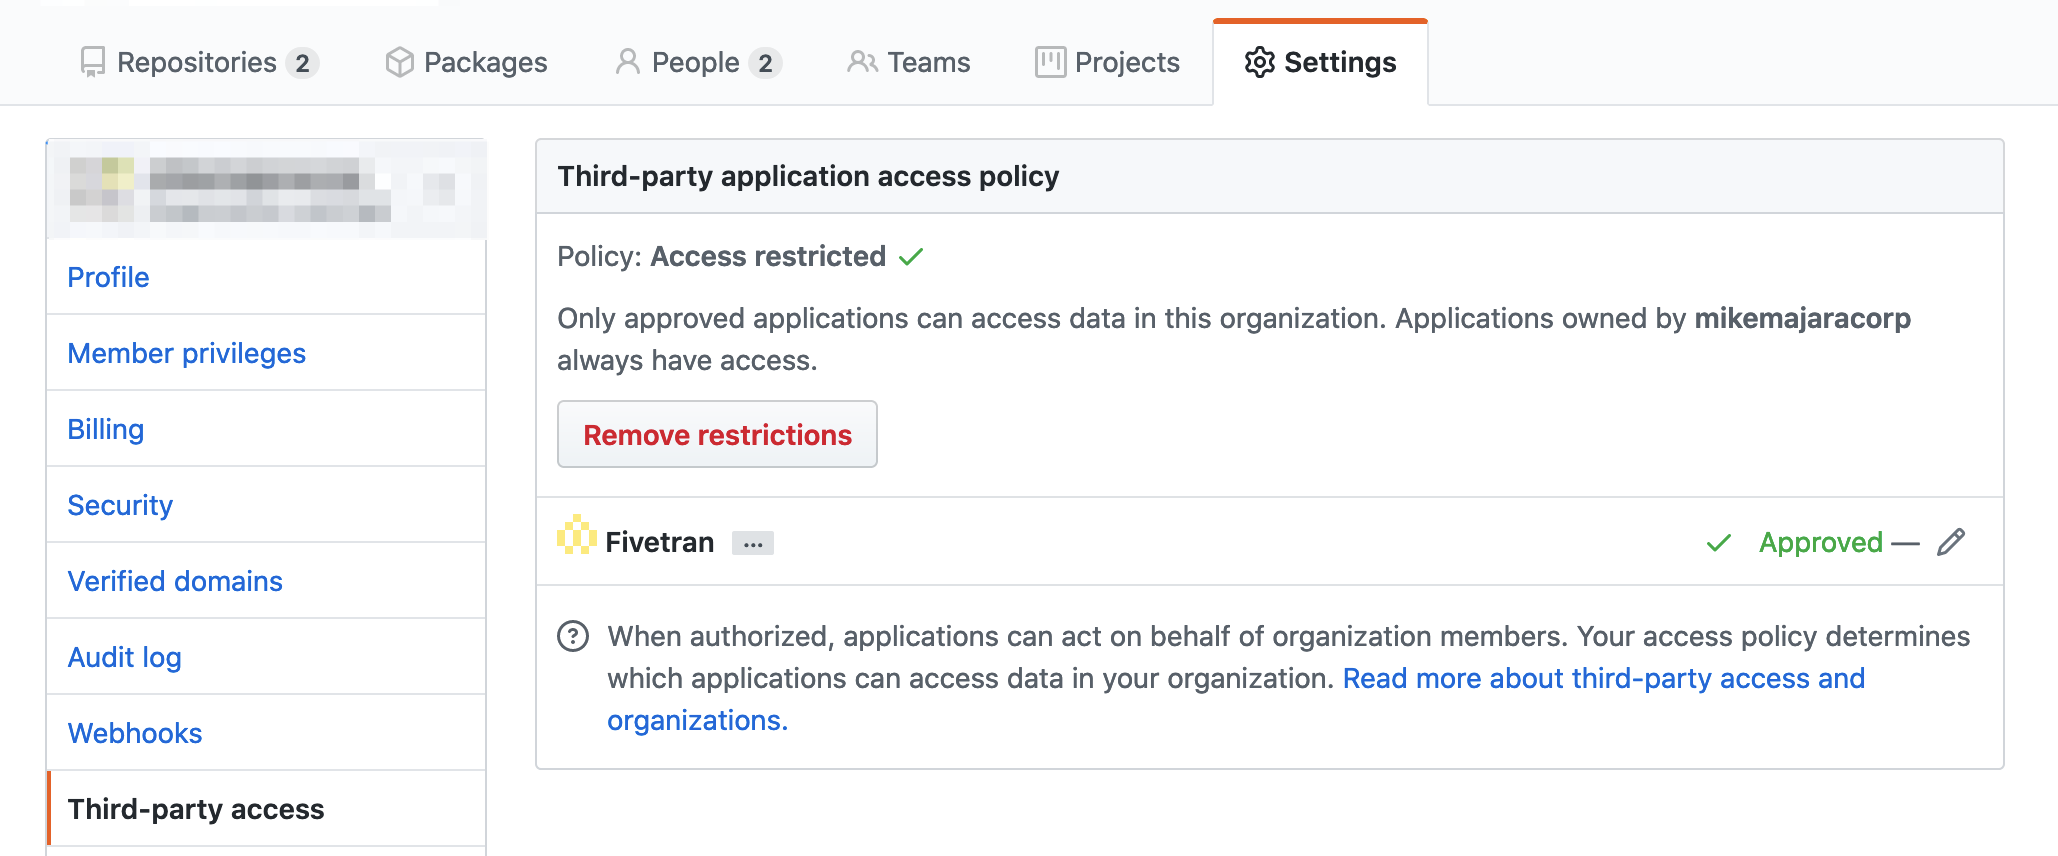 Fivetran approved in GitHub